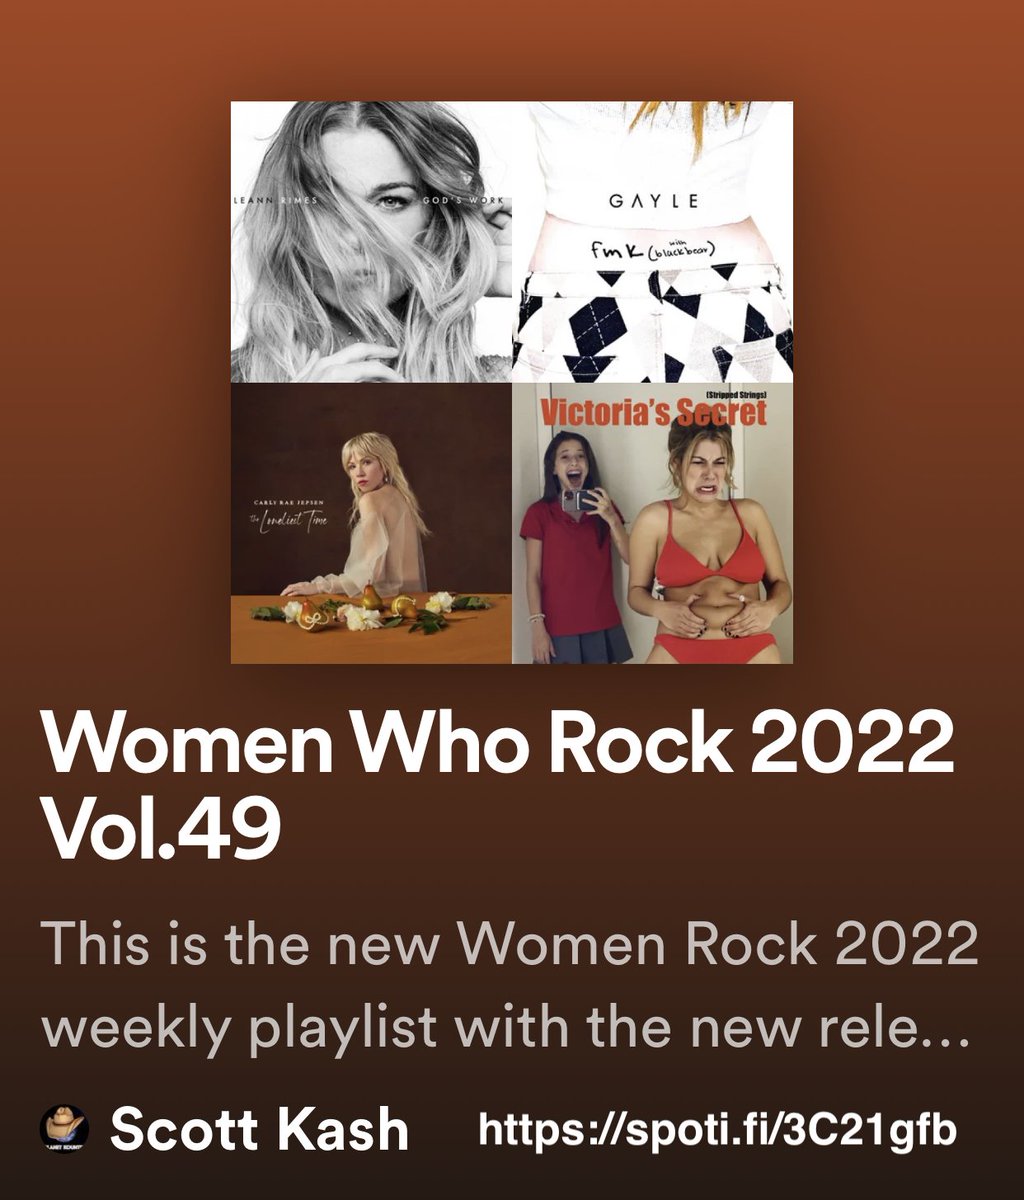 Here’s the new #WomenWhoRock playlist with new releases by @dafnamusic @VincentiKym @michellebranch @AliSingsSongs @nicoannello & @MarisaMcKaye +MORE #Spotify spoti.fi/3C21gfb #NewReleases #Pop #Alternative #Rock #Blues #RnB #rtitbot @rtArtBoost #SpotifyRT